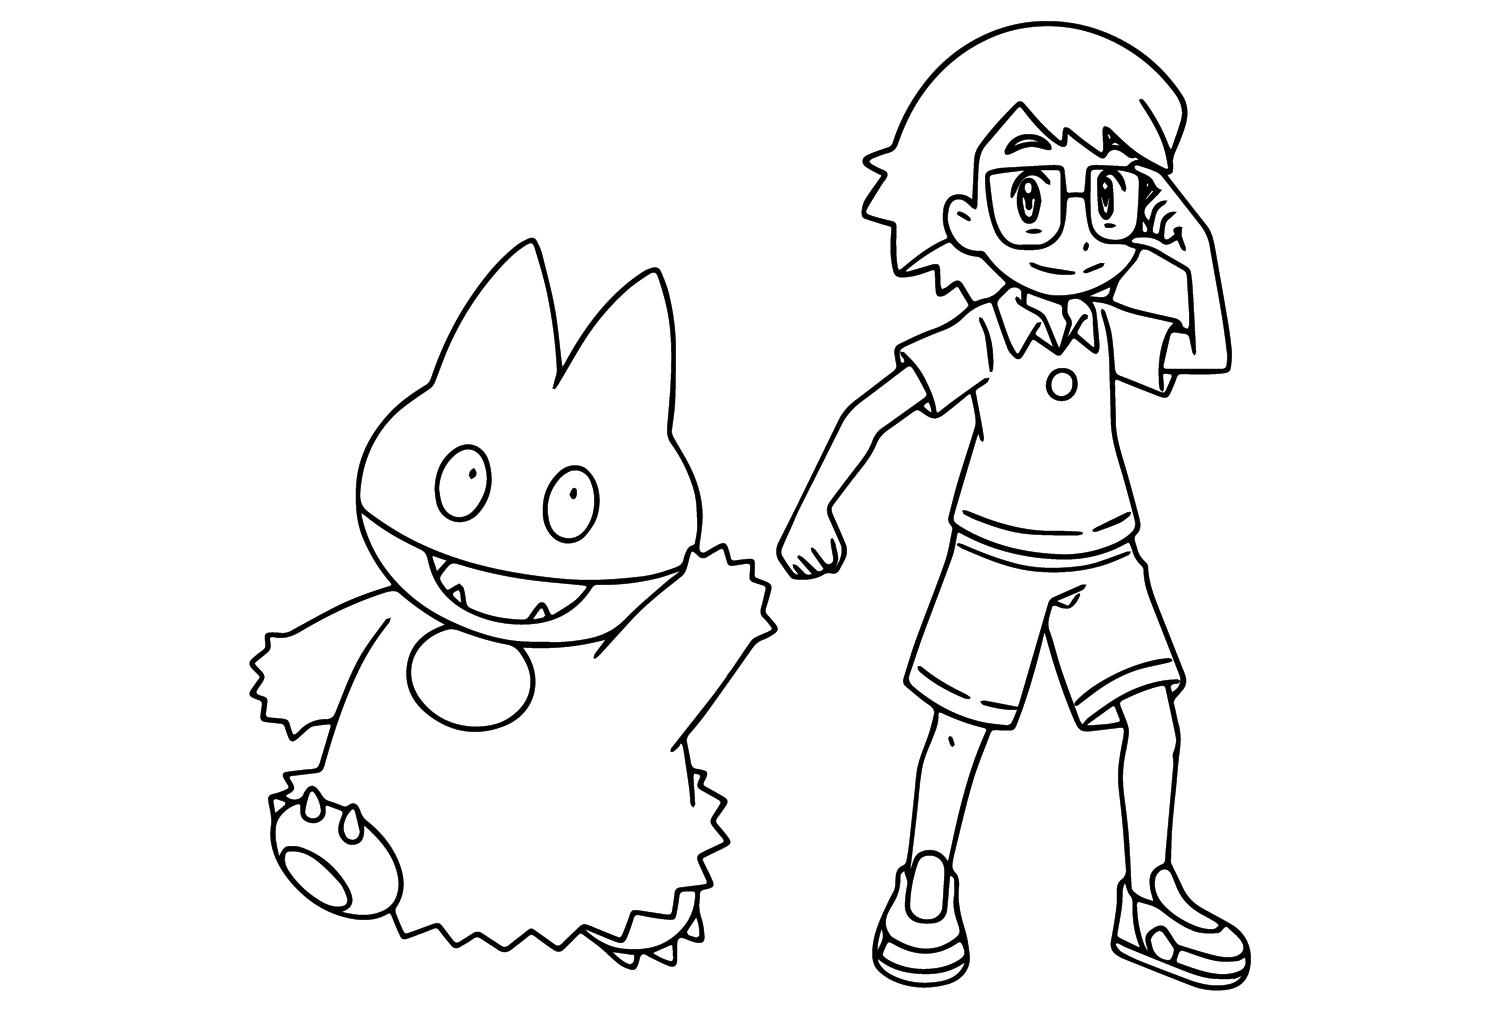 Max and Pokemon Coloring Sheet from Max Pokemon